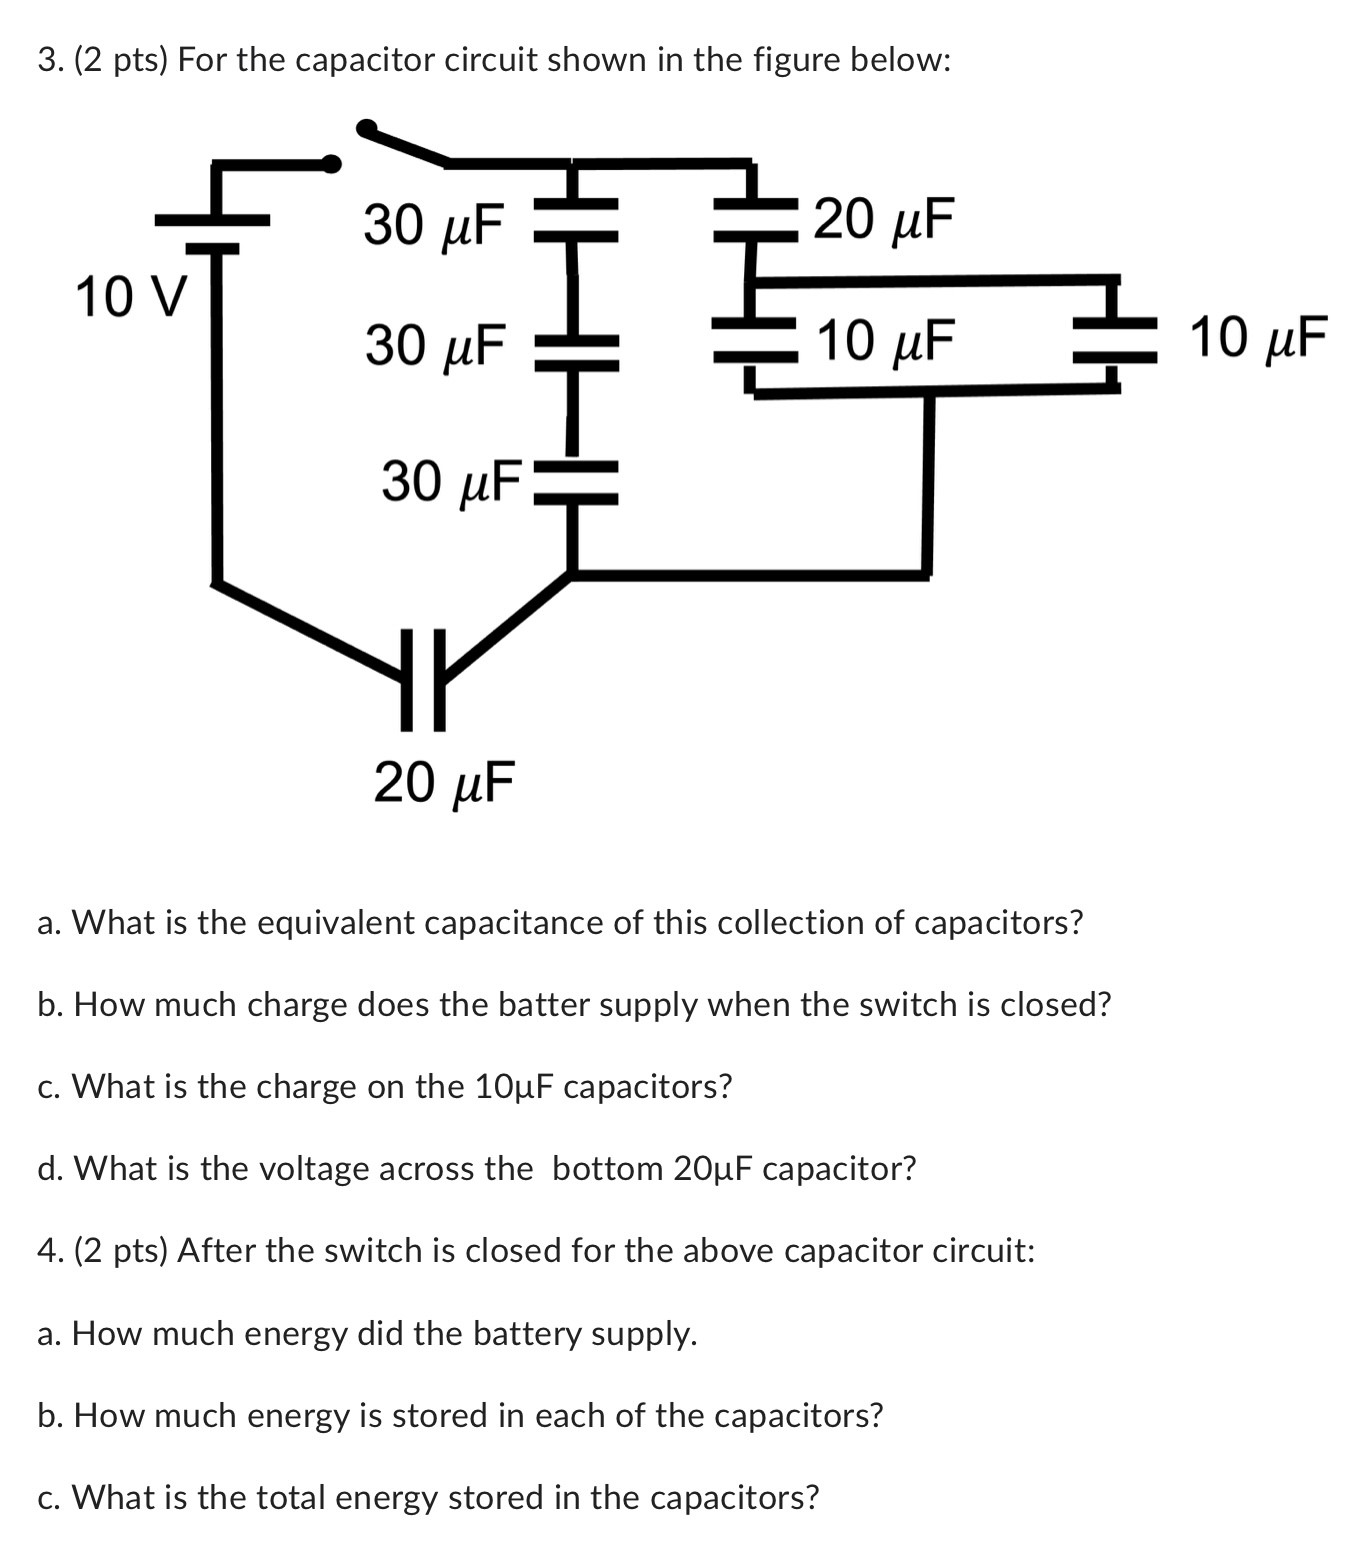 For the capacitor circuit shown in the figure below: a. What is the equivalent capacitance of this collection of capacitors? b. How much charge does the batter supply when the switch is closed? c. What is the charge on the 10 μF capacitors? d. What is the voltage across the bottom 20 μF capacitor? (2 pts) After the switch is closed for the above capacitor circuit: a. How much energy did the battery supply. b. How much energy is stored in each of the capacitors? c. What is the total energy stored in the capacitors?